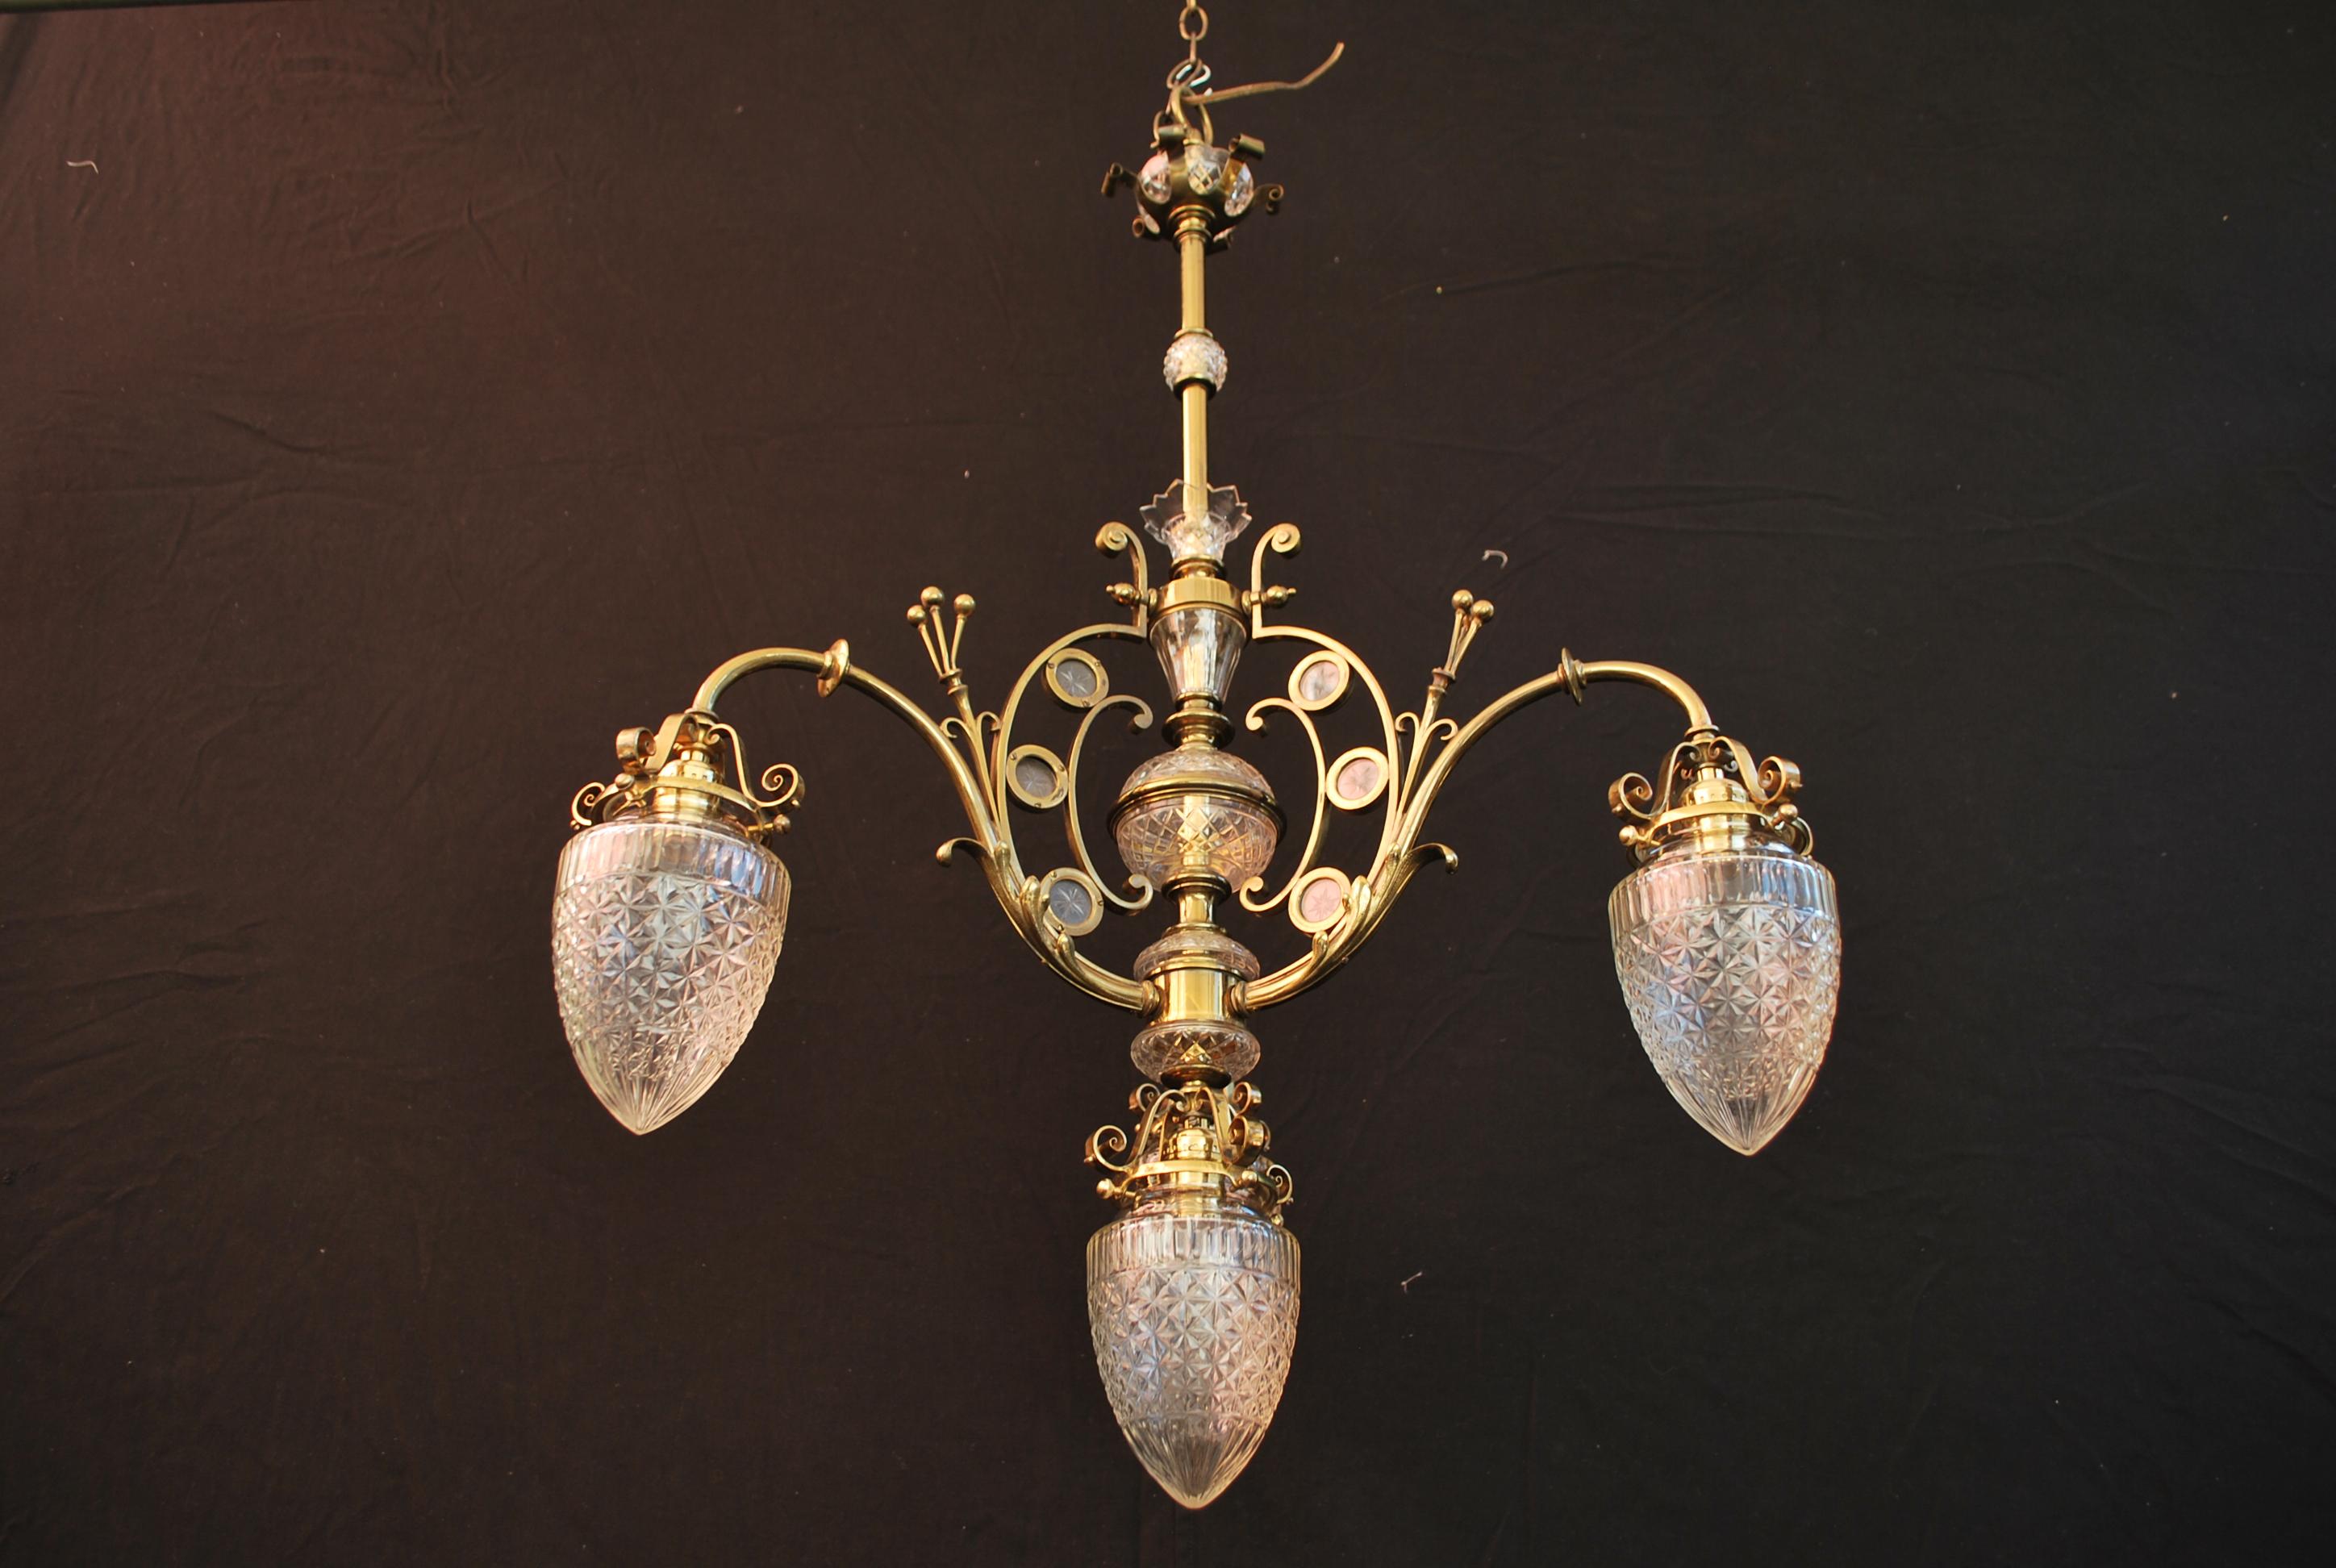 A beautiful and rare Art Nouveau chandelier, the patina is so much nicer in person